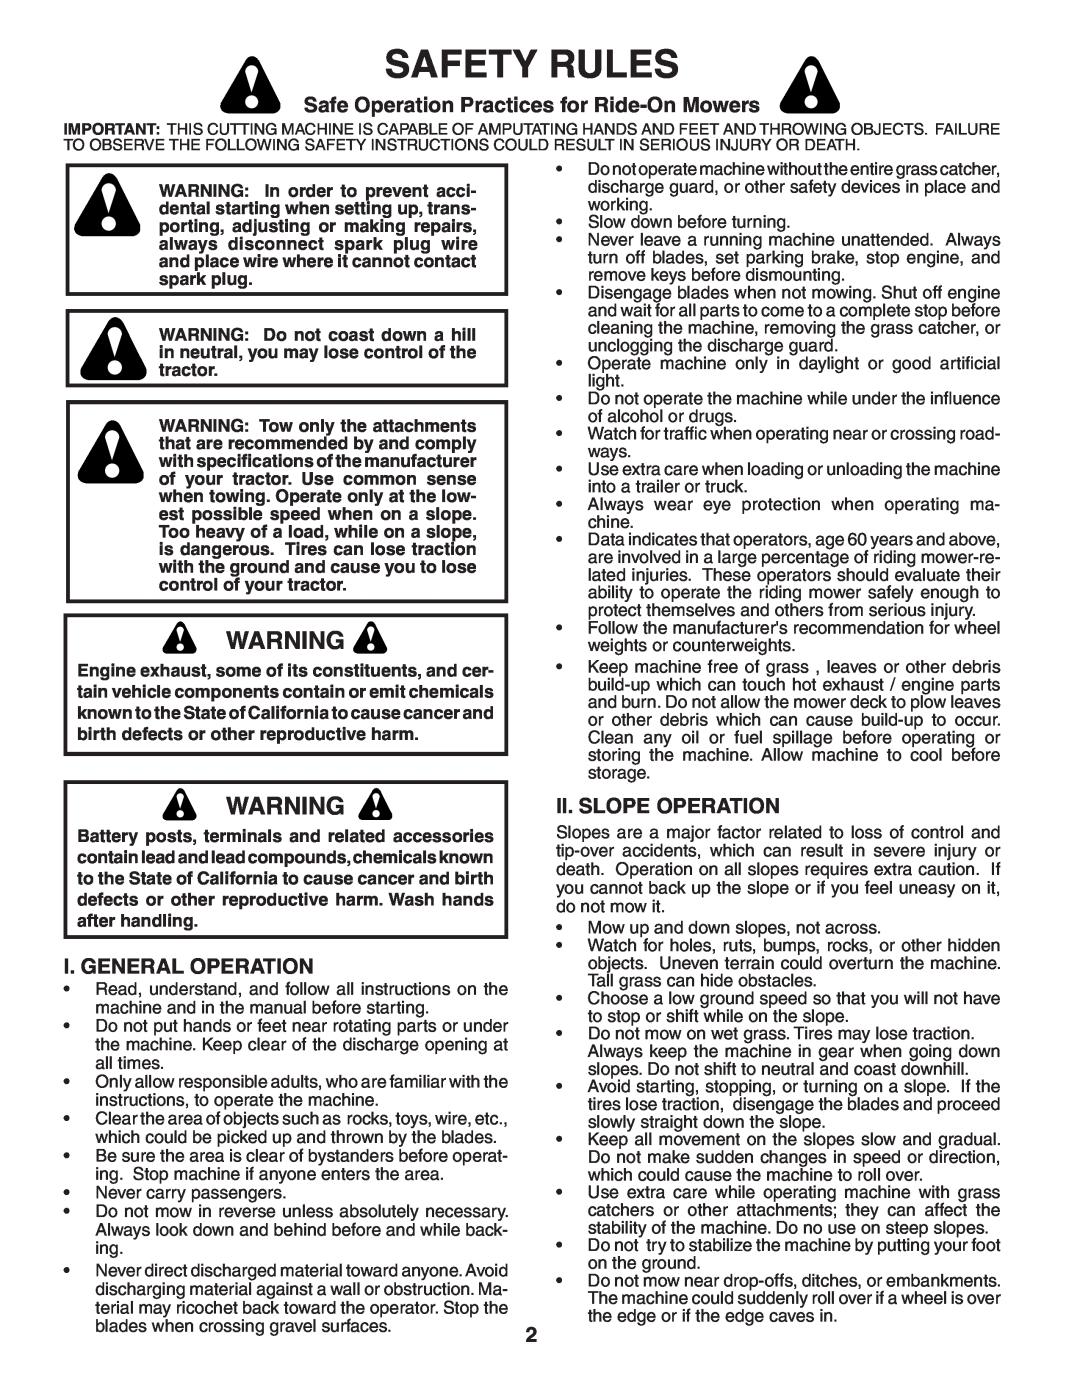 Poulan PKGTH2554 Safety Rules, Safe Operation Practices for Ride-On Mowers, I. General Operation, Ii. Slope Operation 